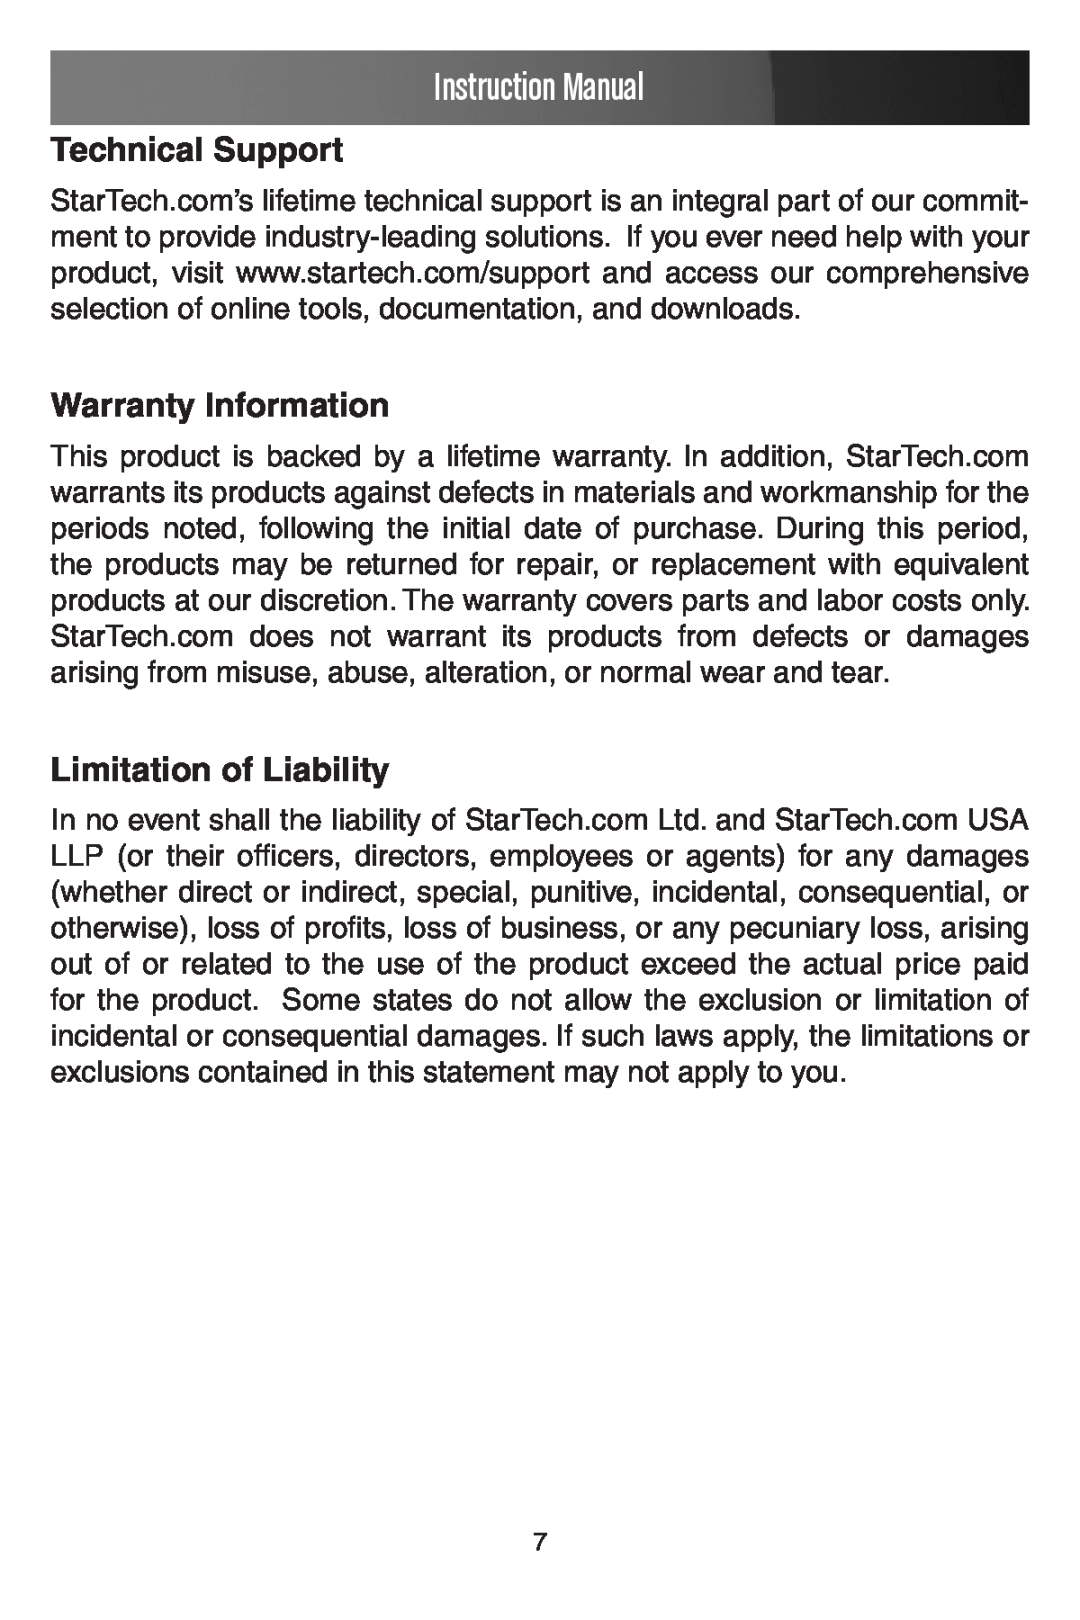 StarTech.com PEX100S manual Technical Support, Warranty Information, Limitation of Liability, Instruction Manual 